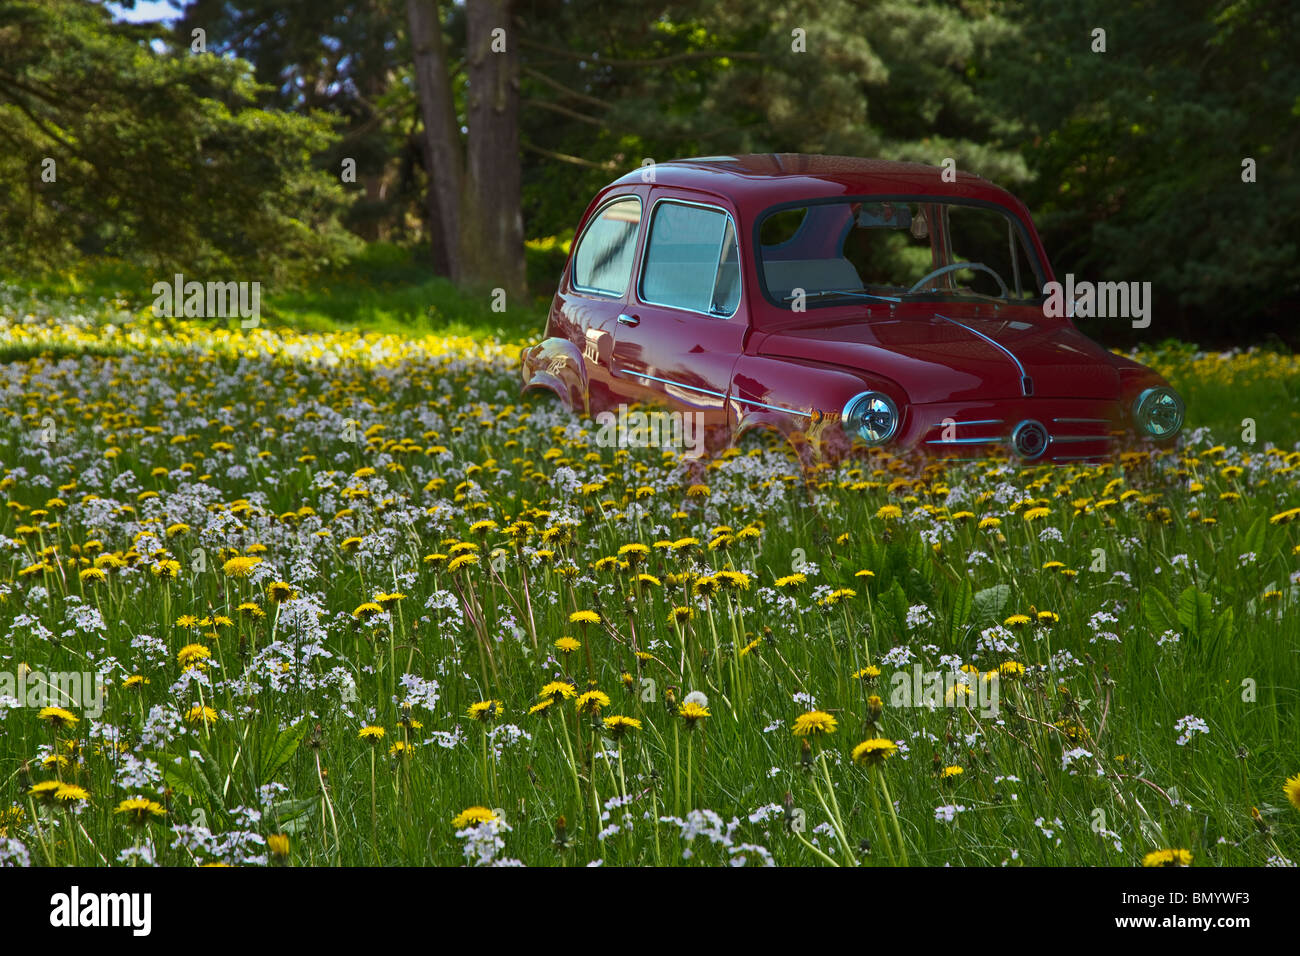 Forest picnic. Red 'Fiat 500' car overgrown with dandelions. Horizontal Stock Photo